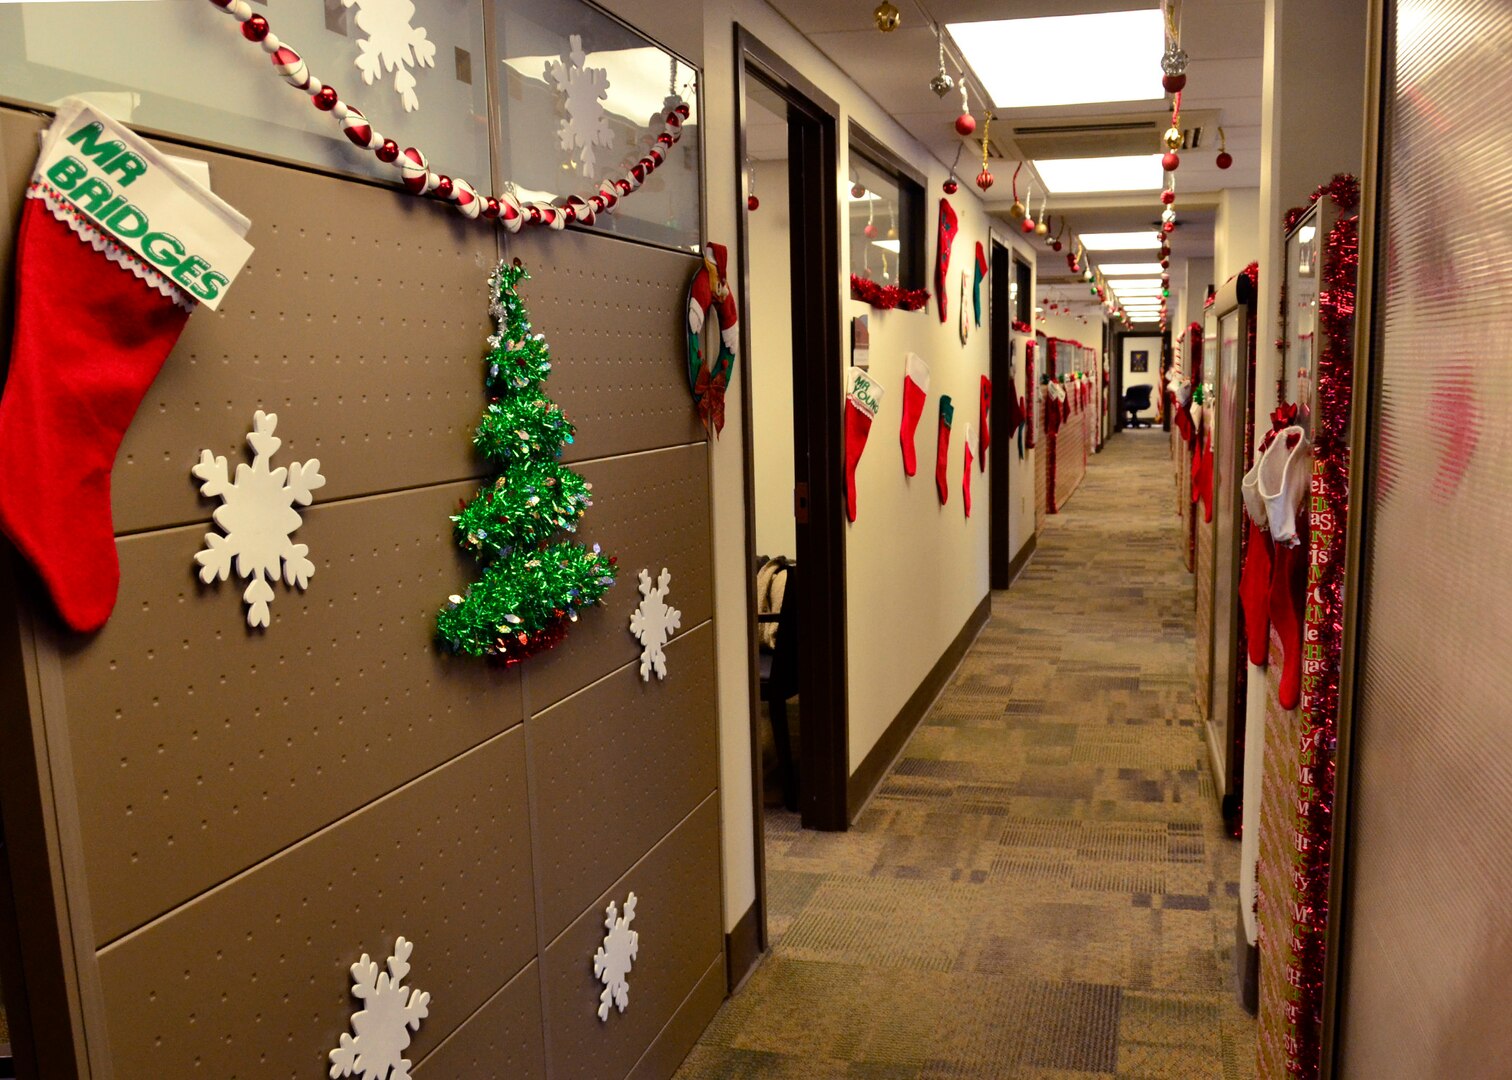 The main walkway of Air Education and Training Command, A4R Logistics and Readiness office is decorated with gift wrapping, stockings and other seasonal ornaments by Marc Collette, Headquarters AETC, command equipment manager, A4R December 4, 2018 at Joint Base San Antonio, Texas. Collette tries not to impose on anyone’s workspace and focuses his creative design on the common areas.